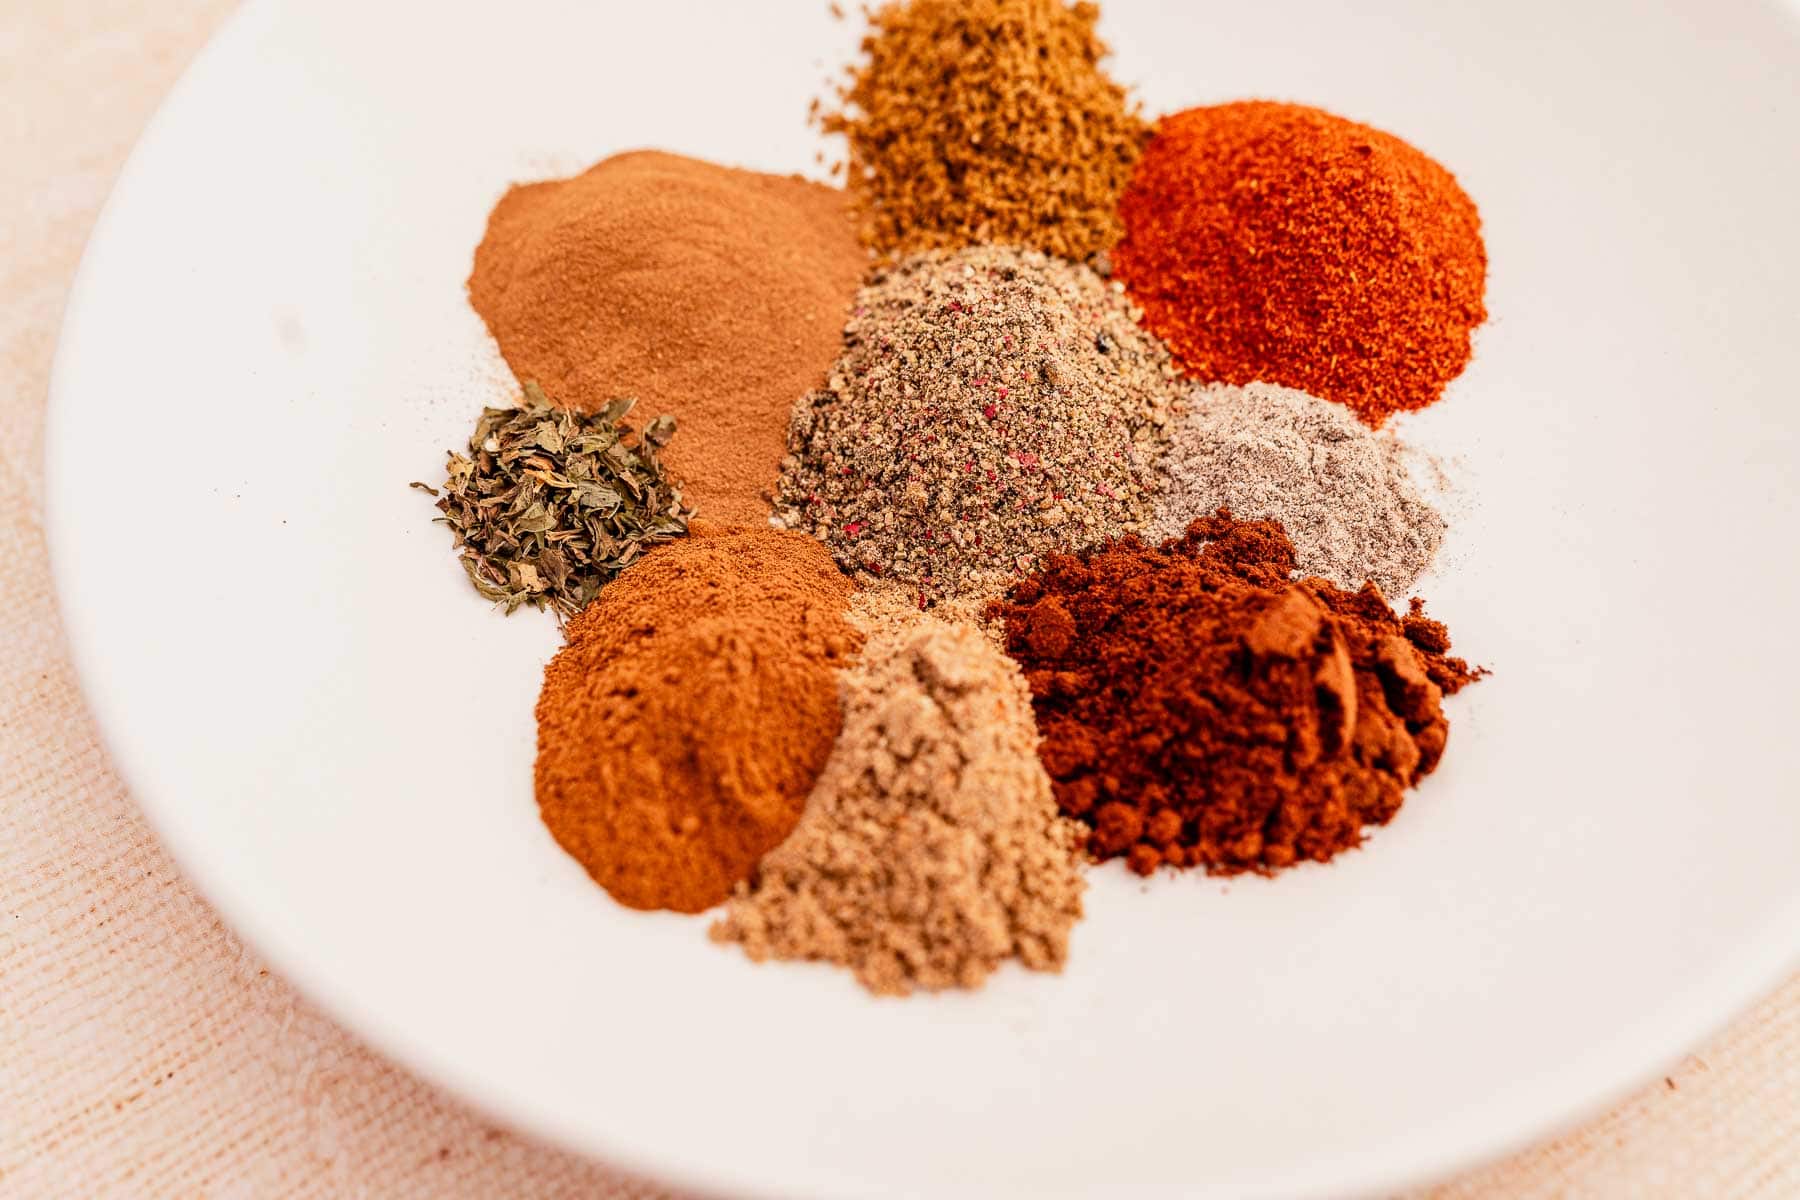 Baharat spices in a white plate on a wooden table.